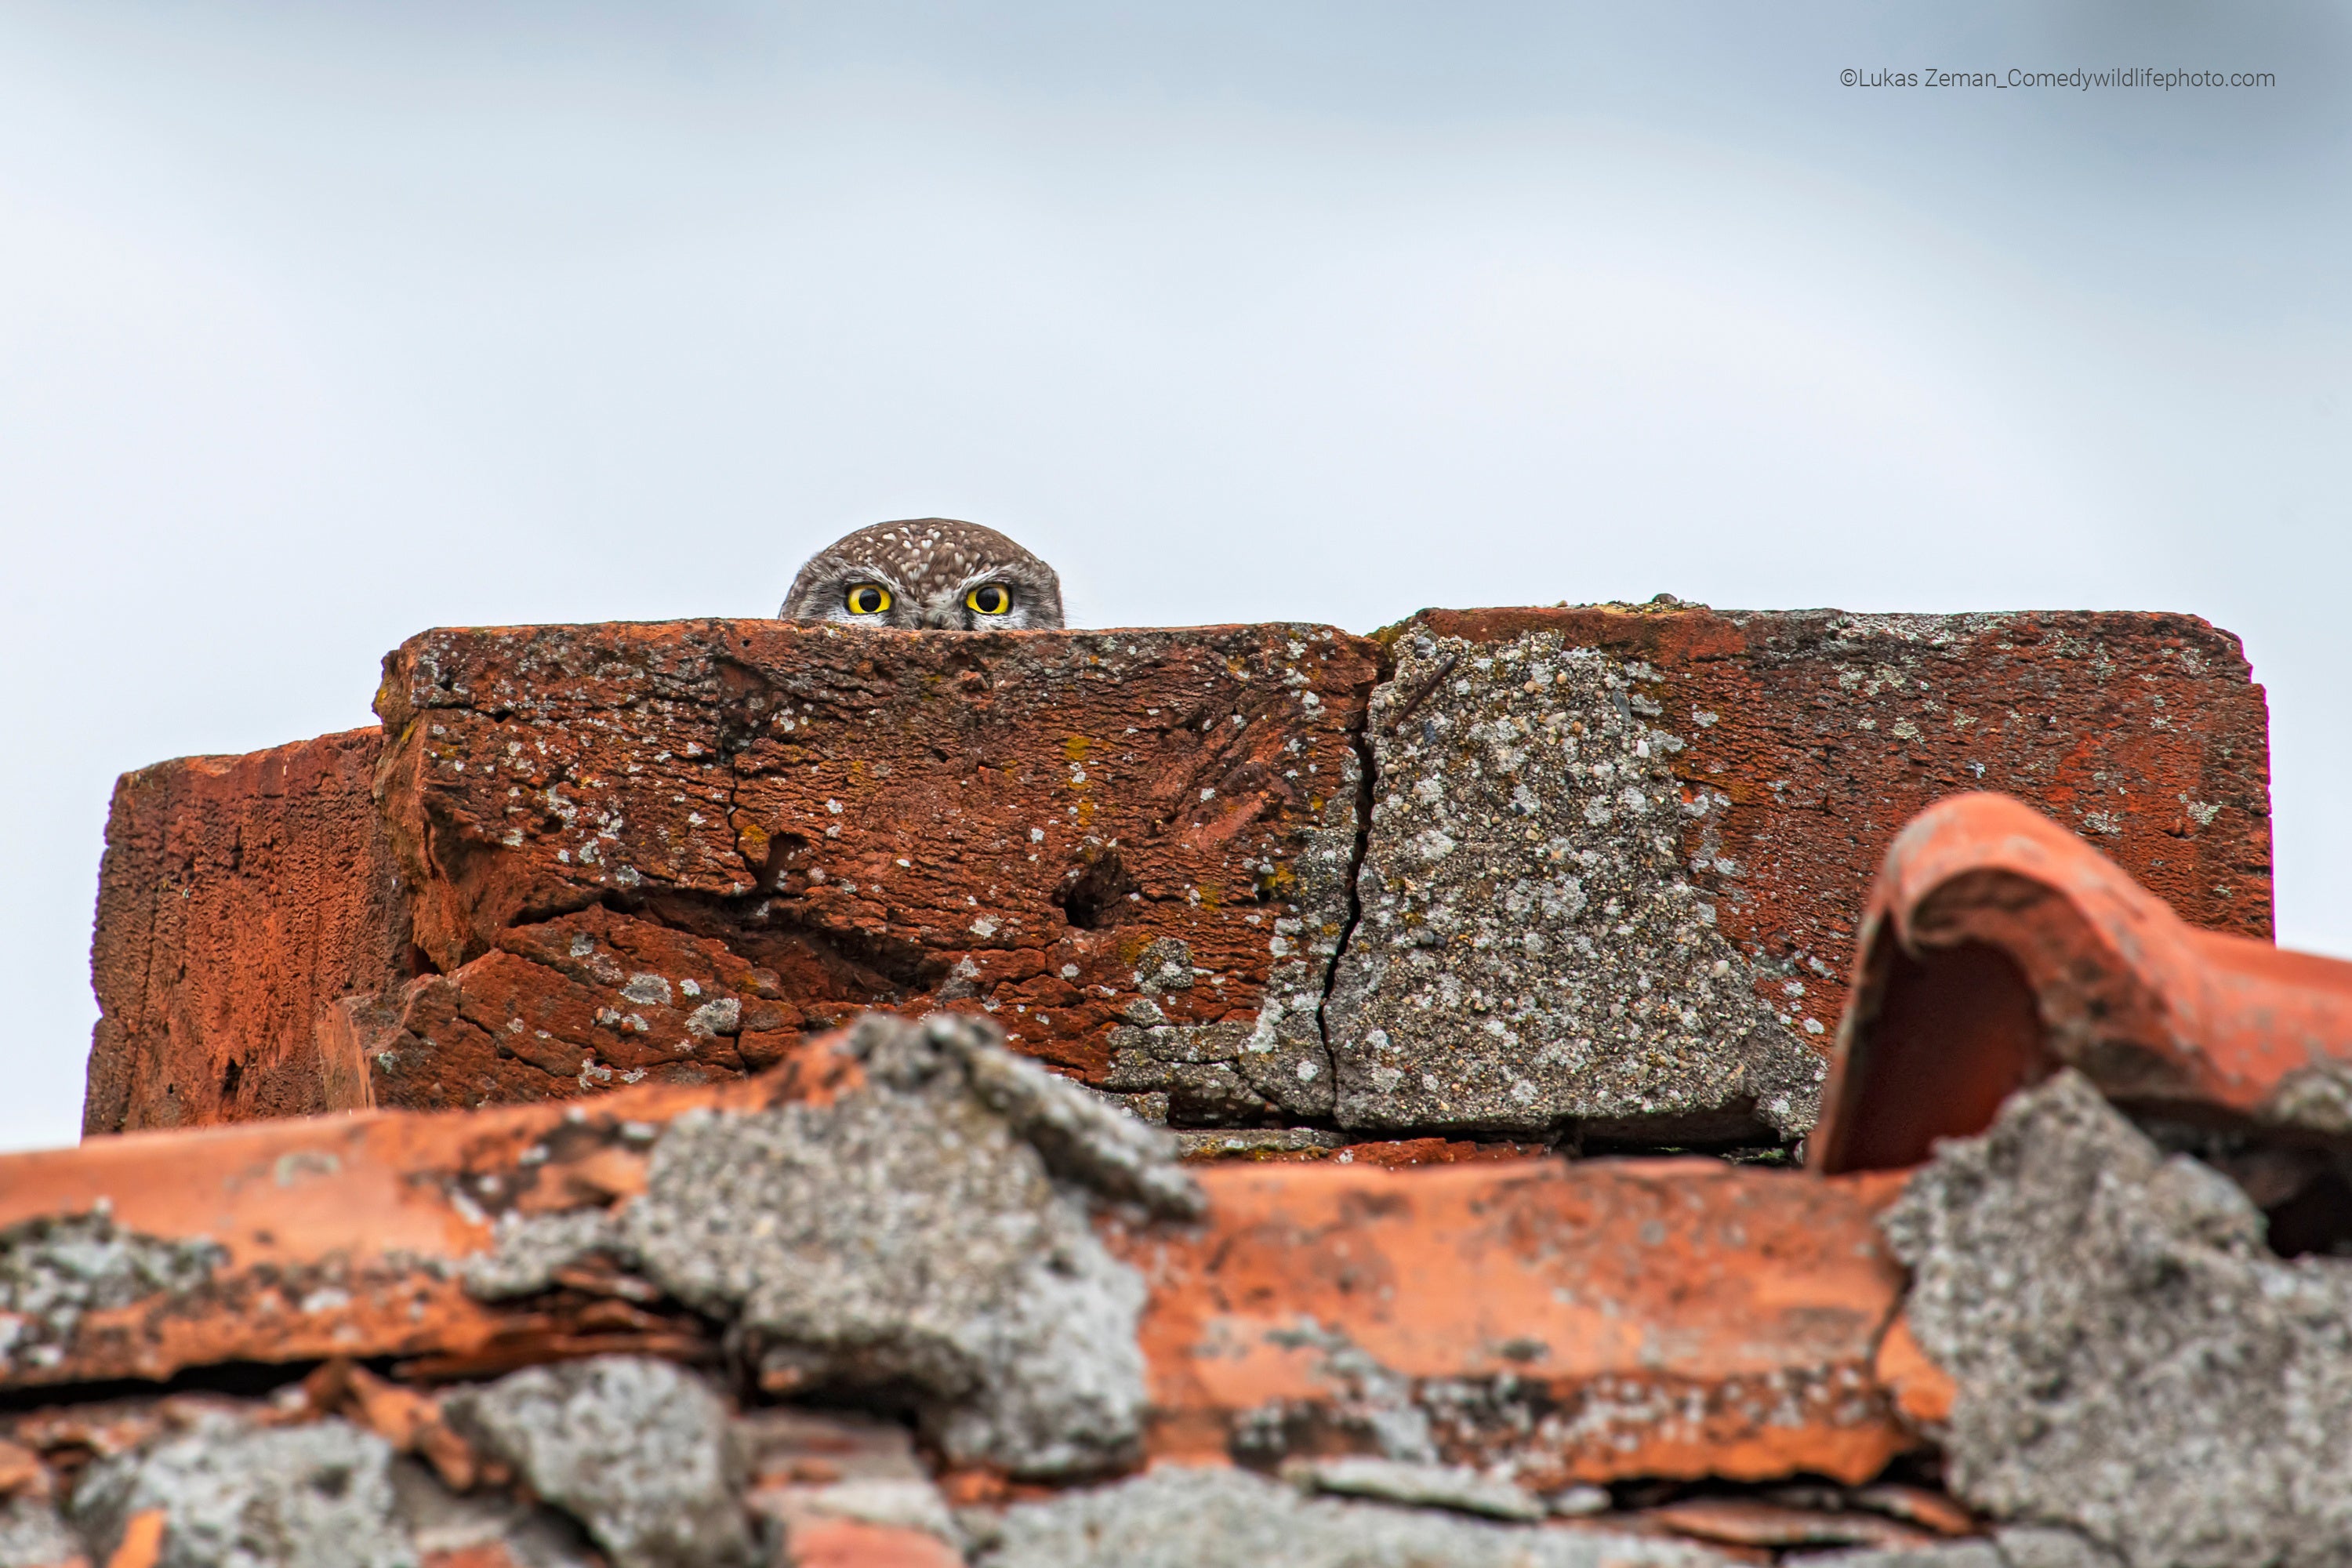 An owl pokes its head up from behind the remains of a chimney. (Photo: © Lukas Zeman / Comedywildlifephoto.com.)